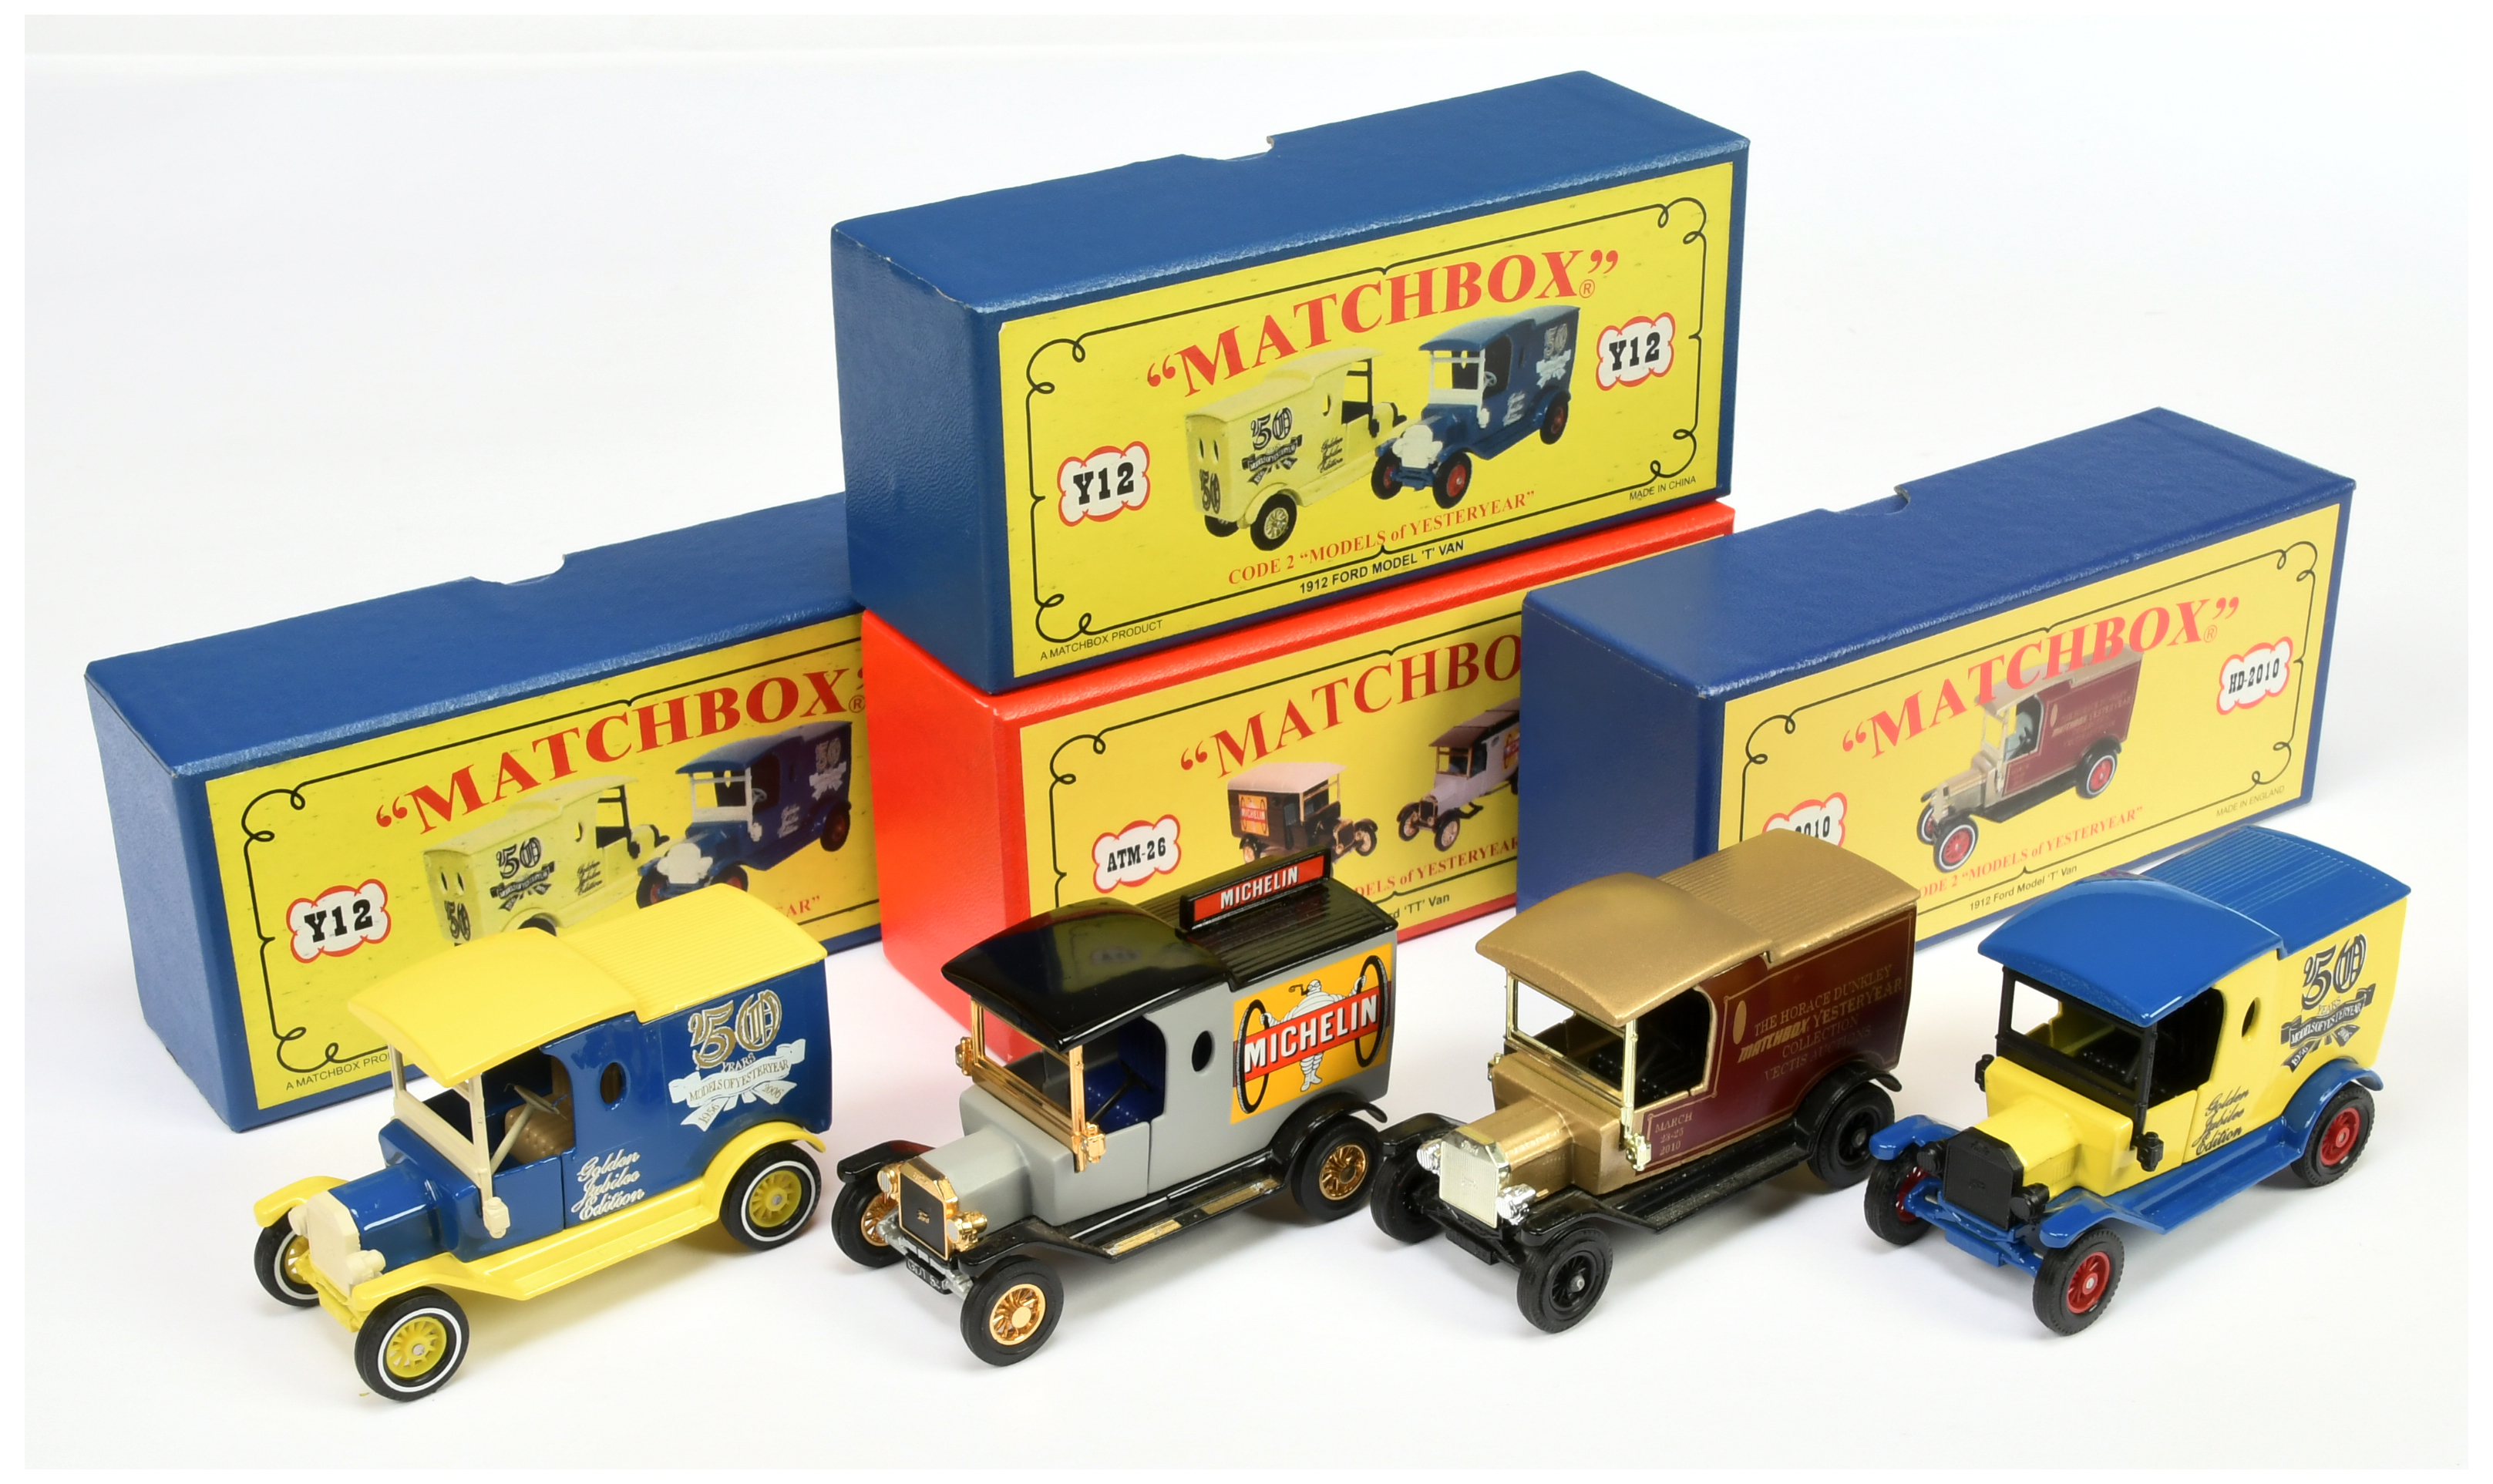 Matchbox Models of Yesteryear Code 2 issues "Golden 50 Years Models of Yesteryear 1956 - 2006"  (...